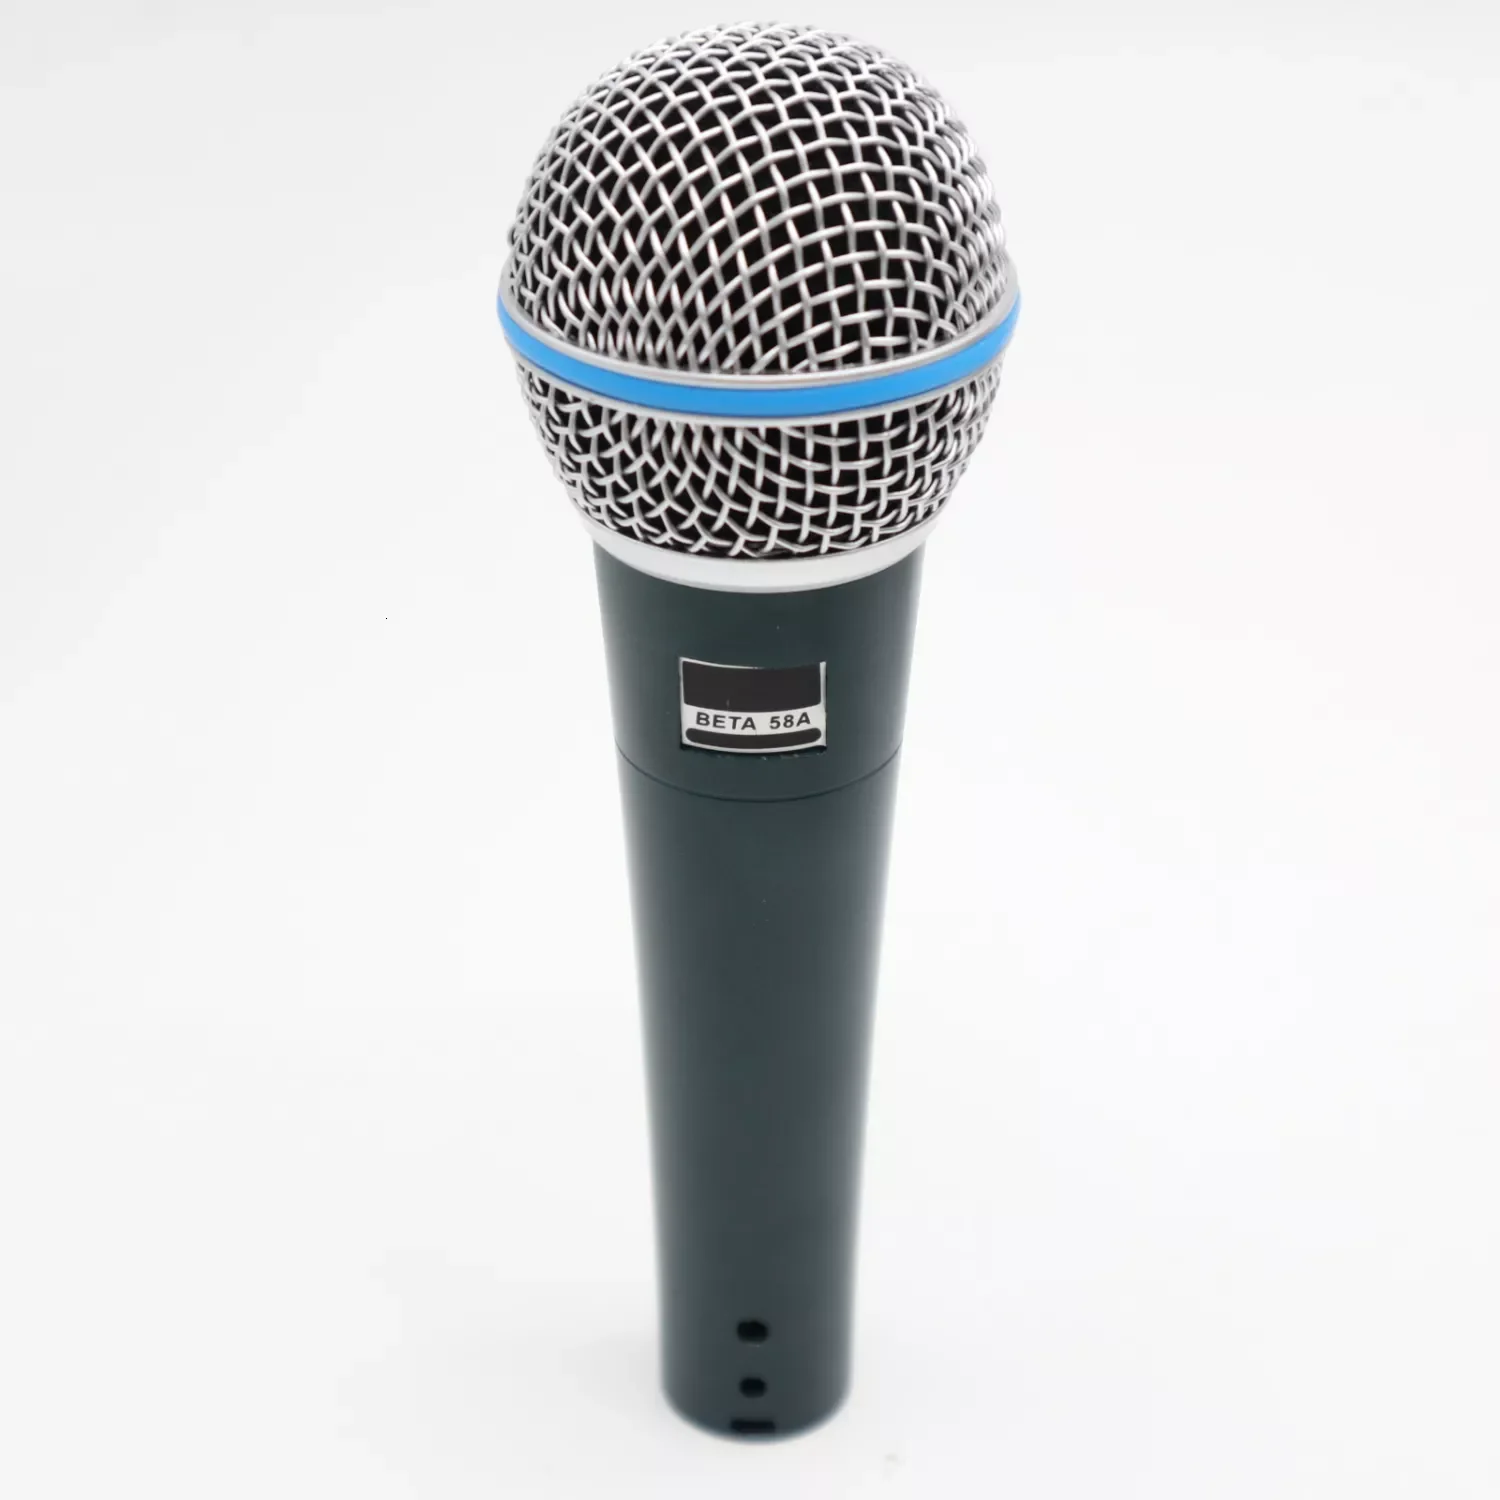 

Professional Handheld Switch Vocal Dynamic Microphone Mike For BETA 58A 58 Studio Singing Home Party KTV Speech Karaoke